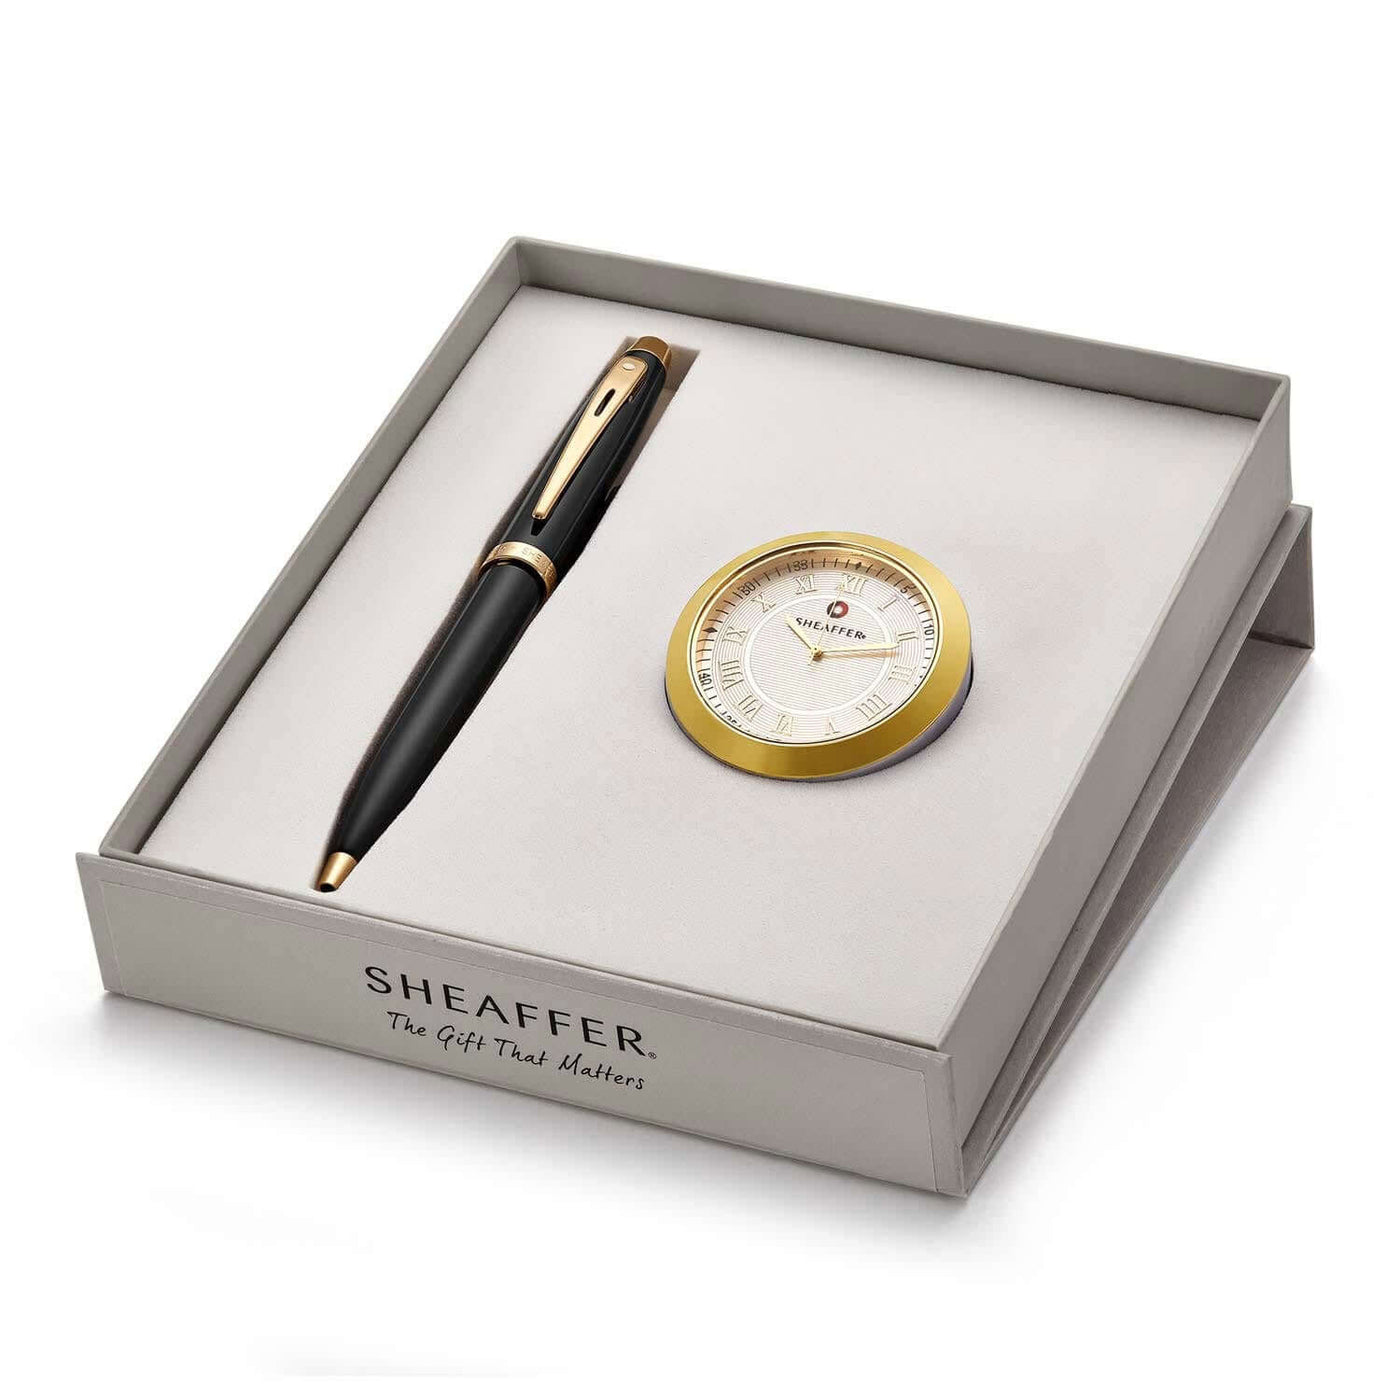 Sheaffer Gift Set - 100 Series Black GT Ball Pen With Gold Table Clock